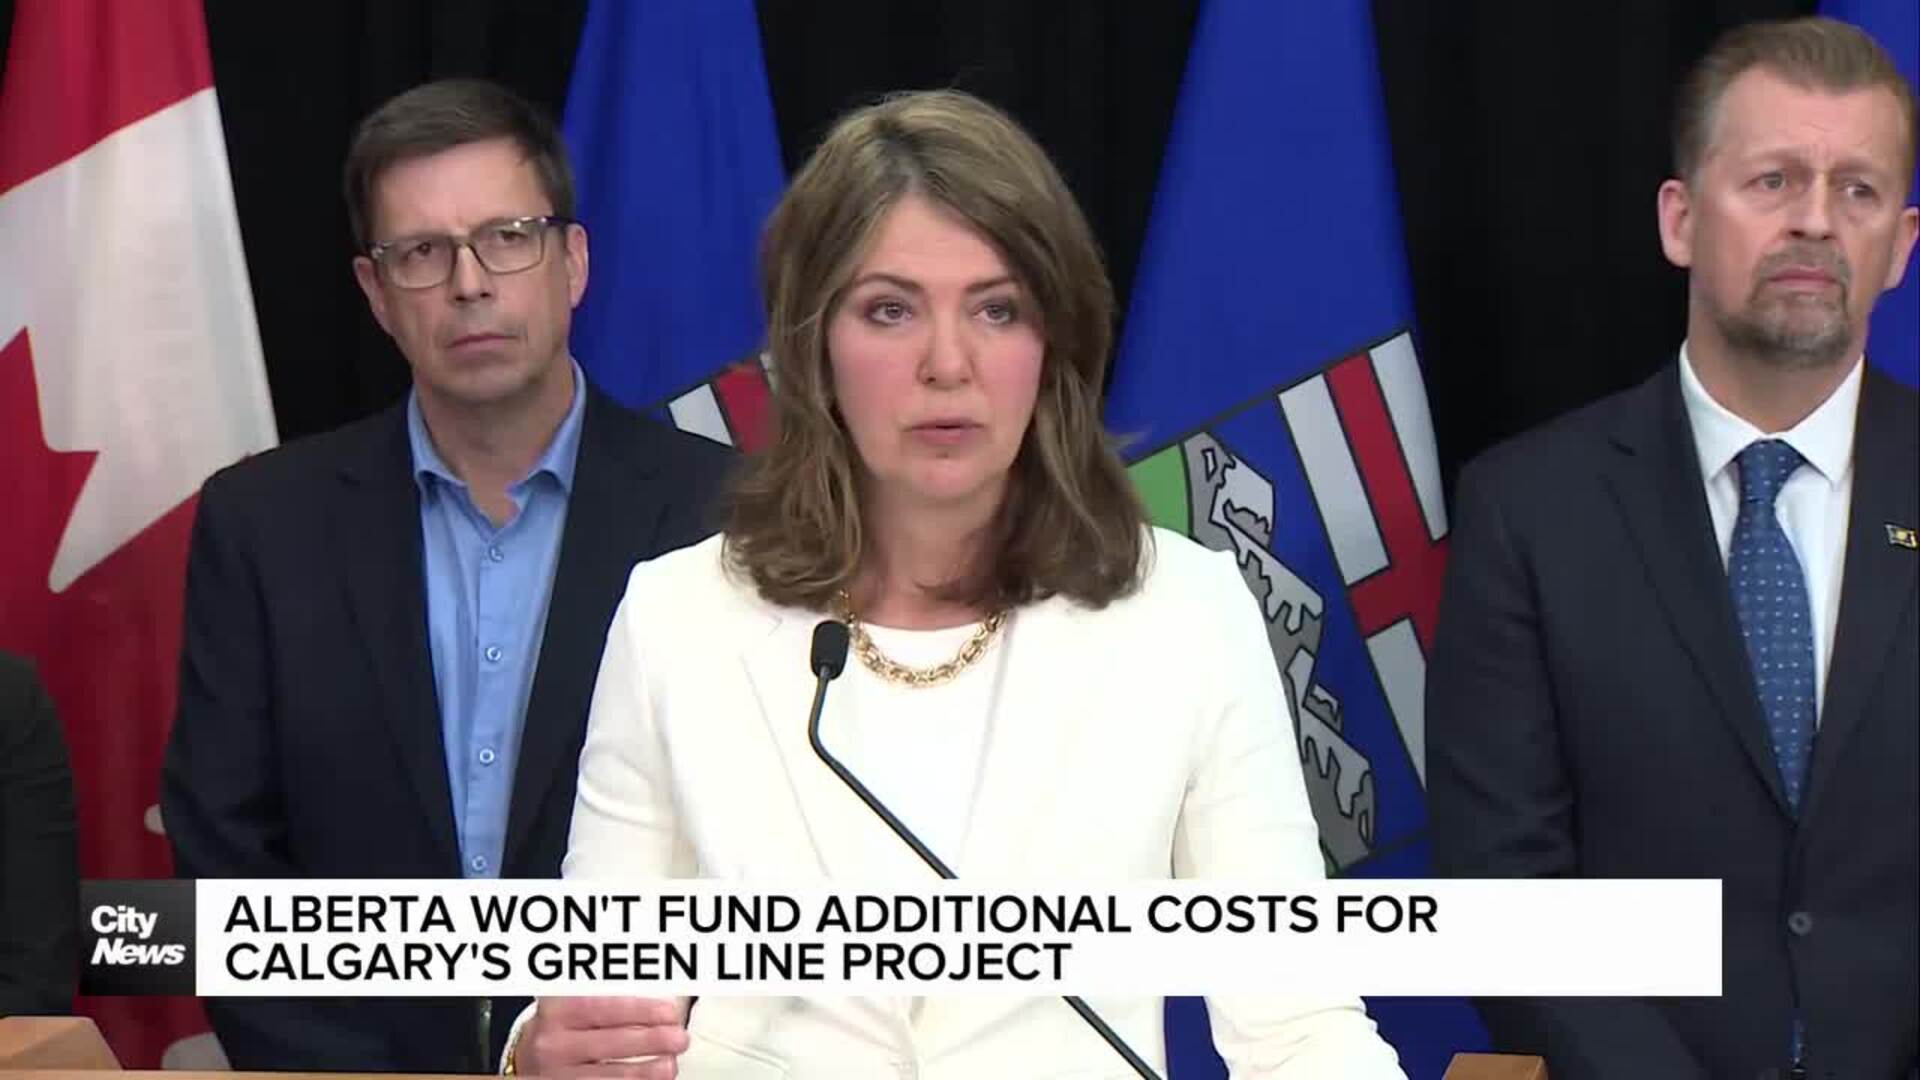 Alberta won't fund additional costs for Calgary's Green Line project